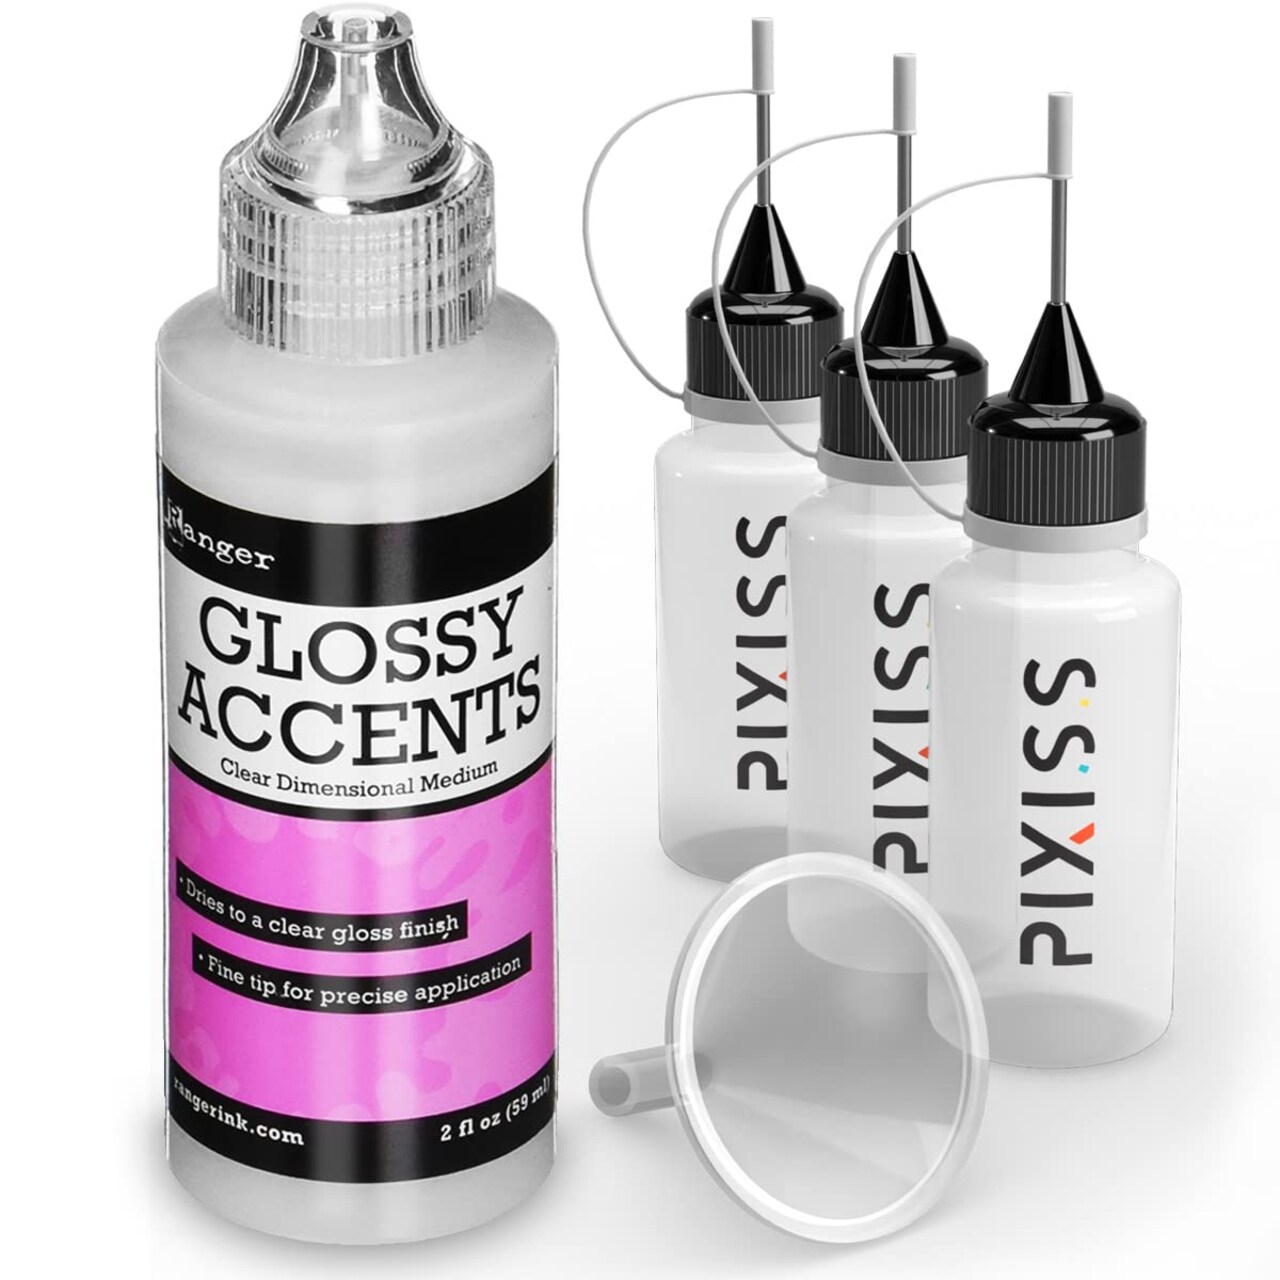 Glossy Accents 2-Ounce, 3 Pixiss 20 Milliliter Applicator and Refill Bottles